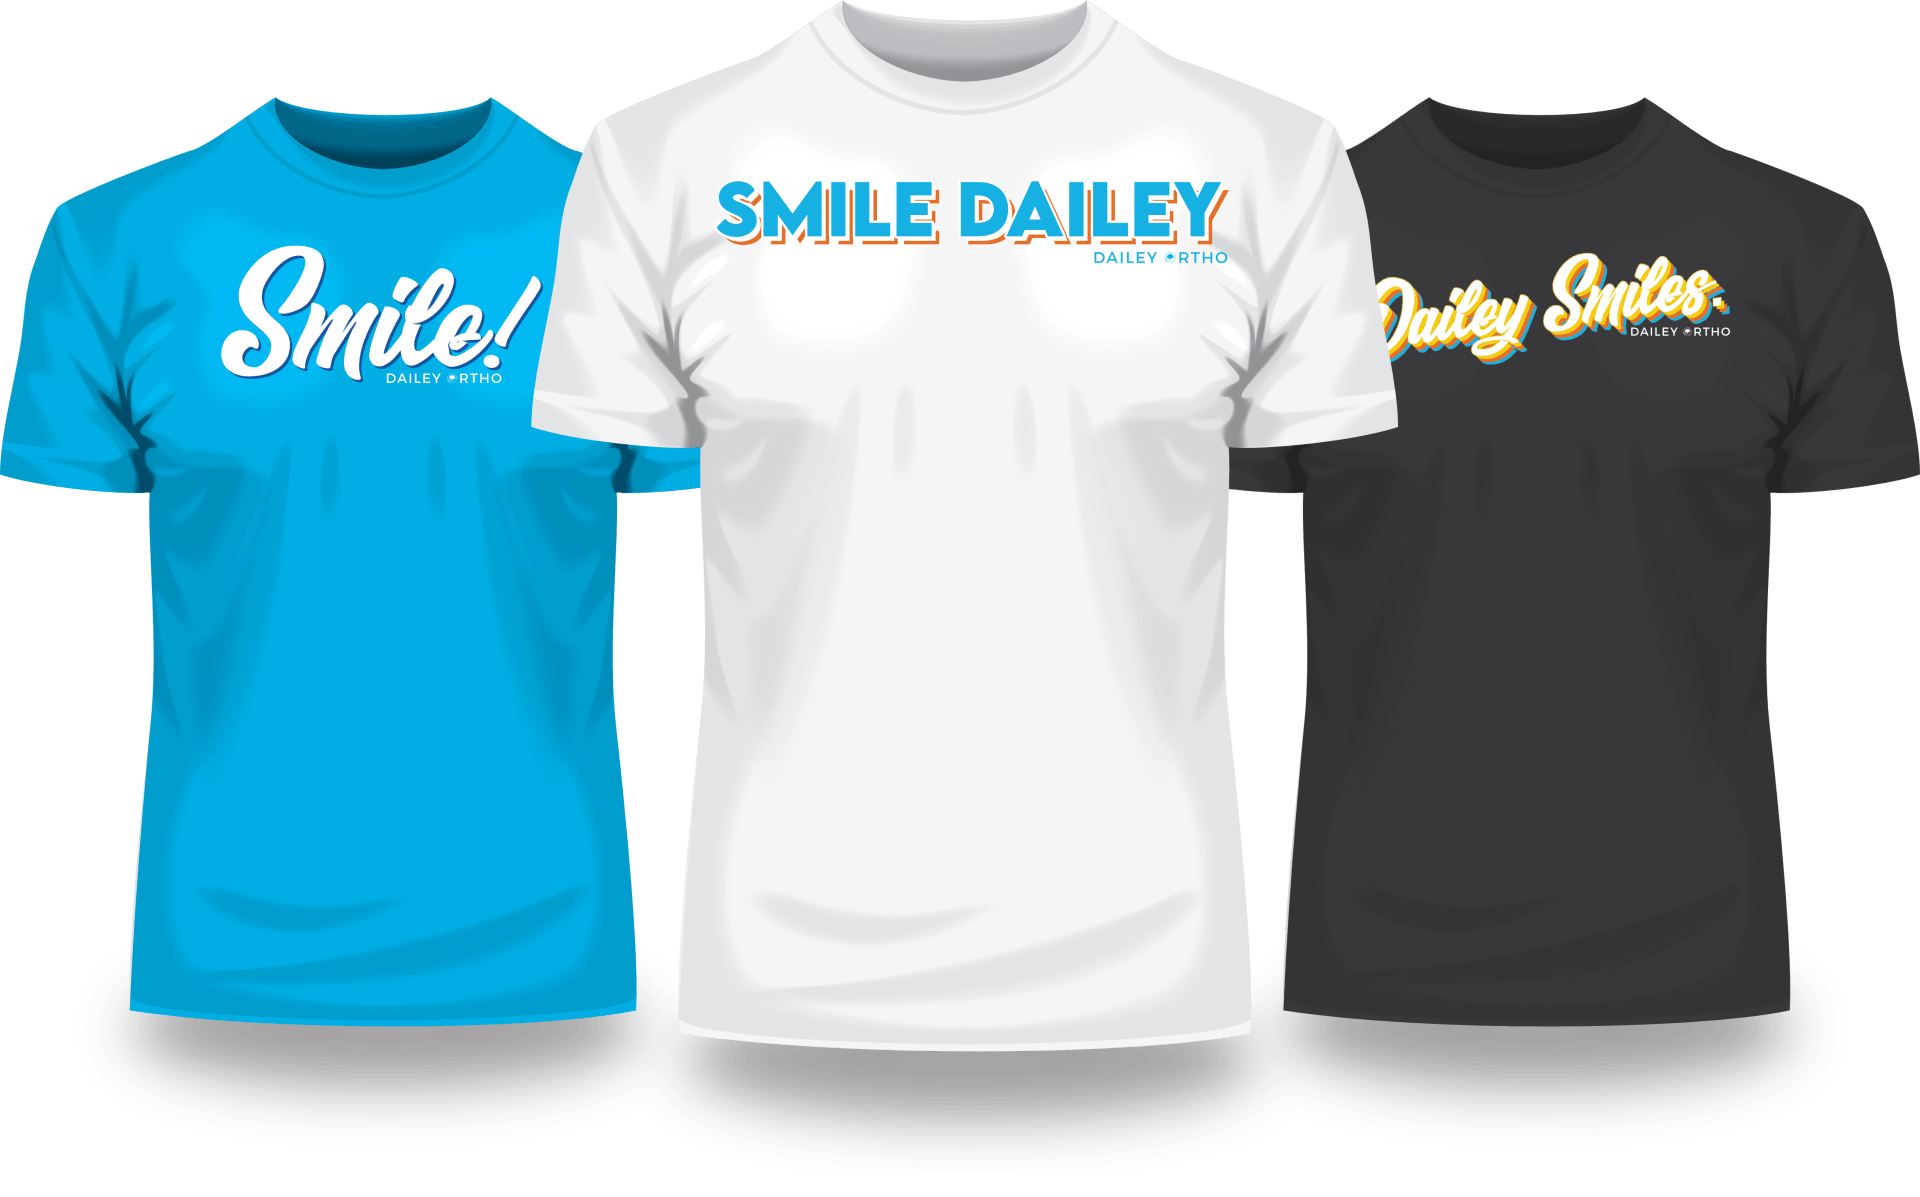 Examples of an OMG client t-shirt